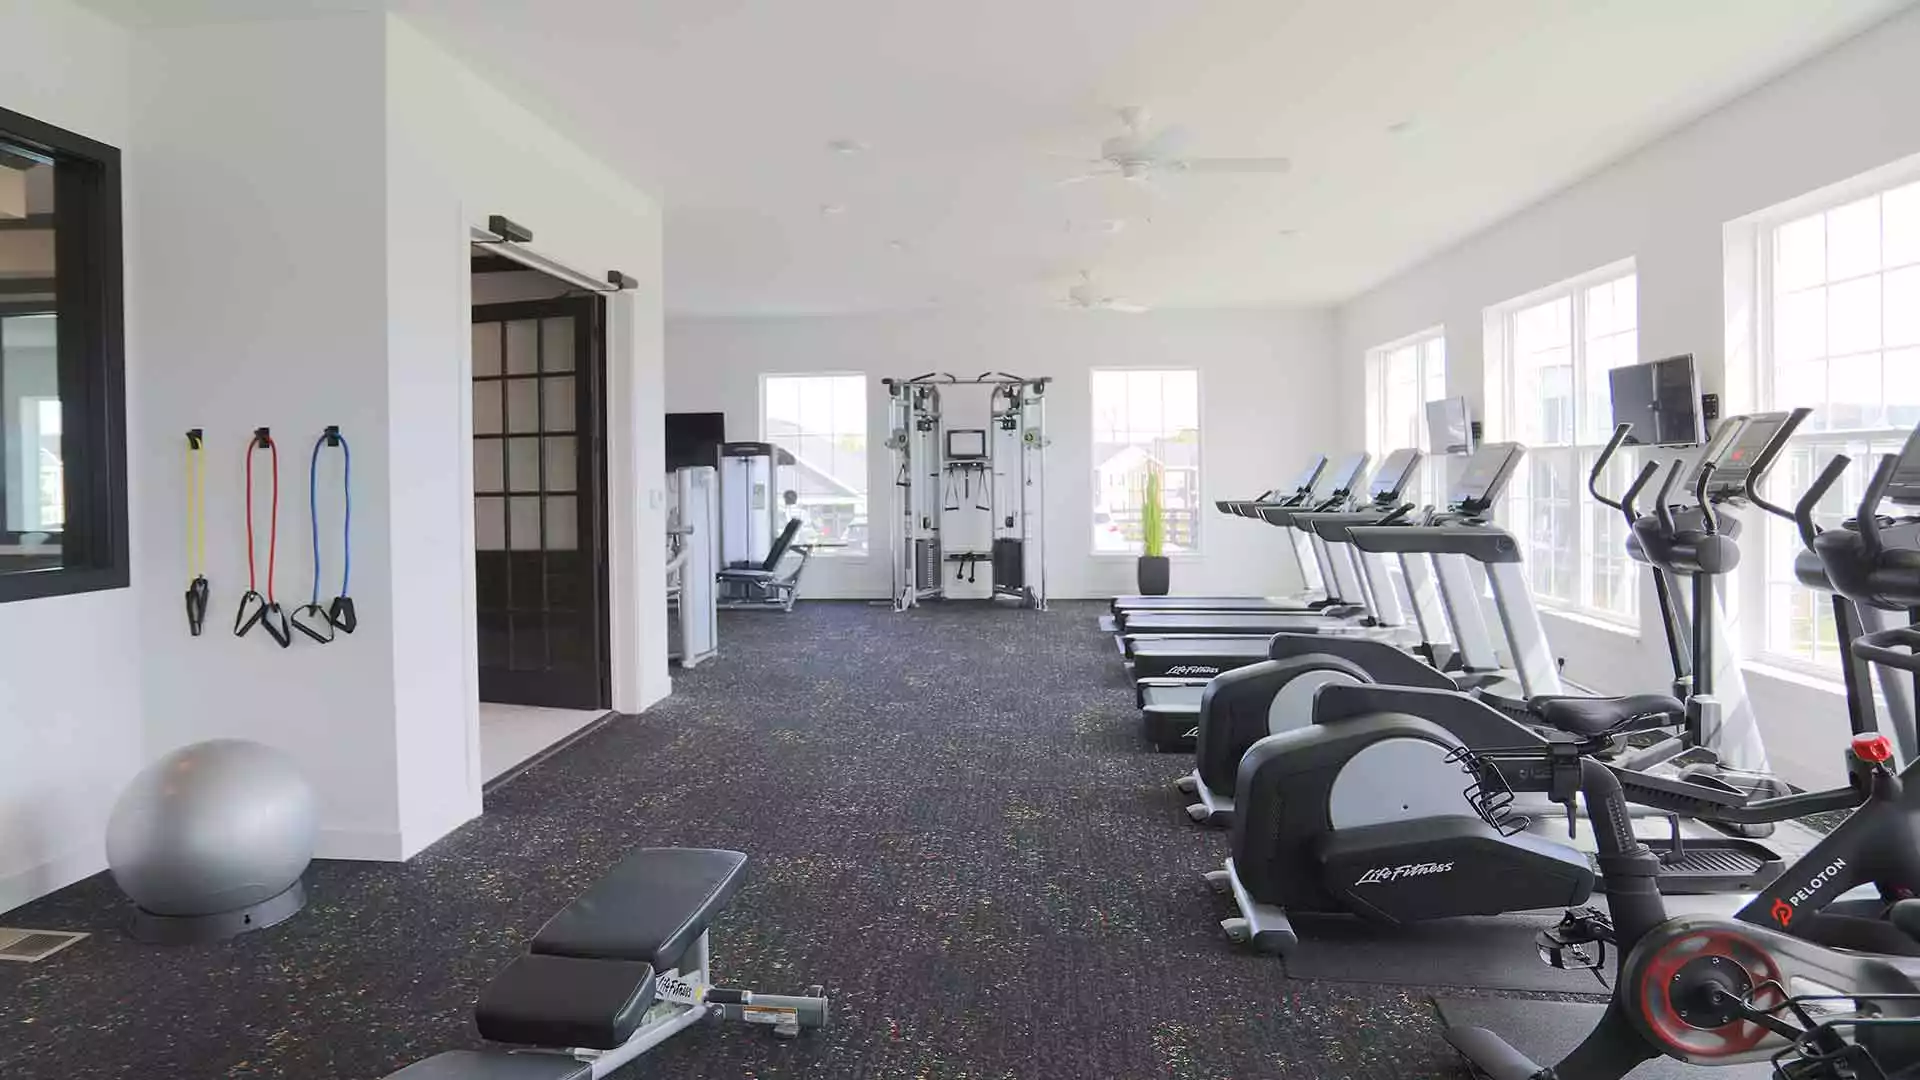 Spacious fitness center with exercise machines at Greyson on 27.